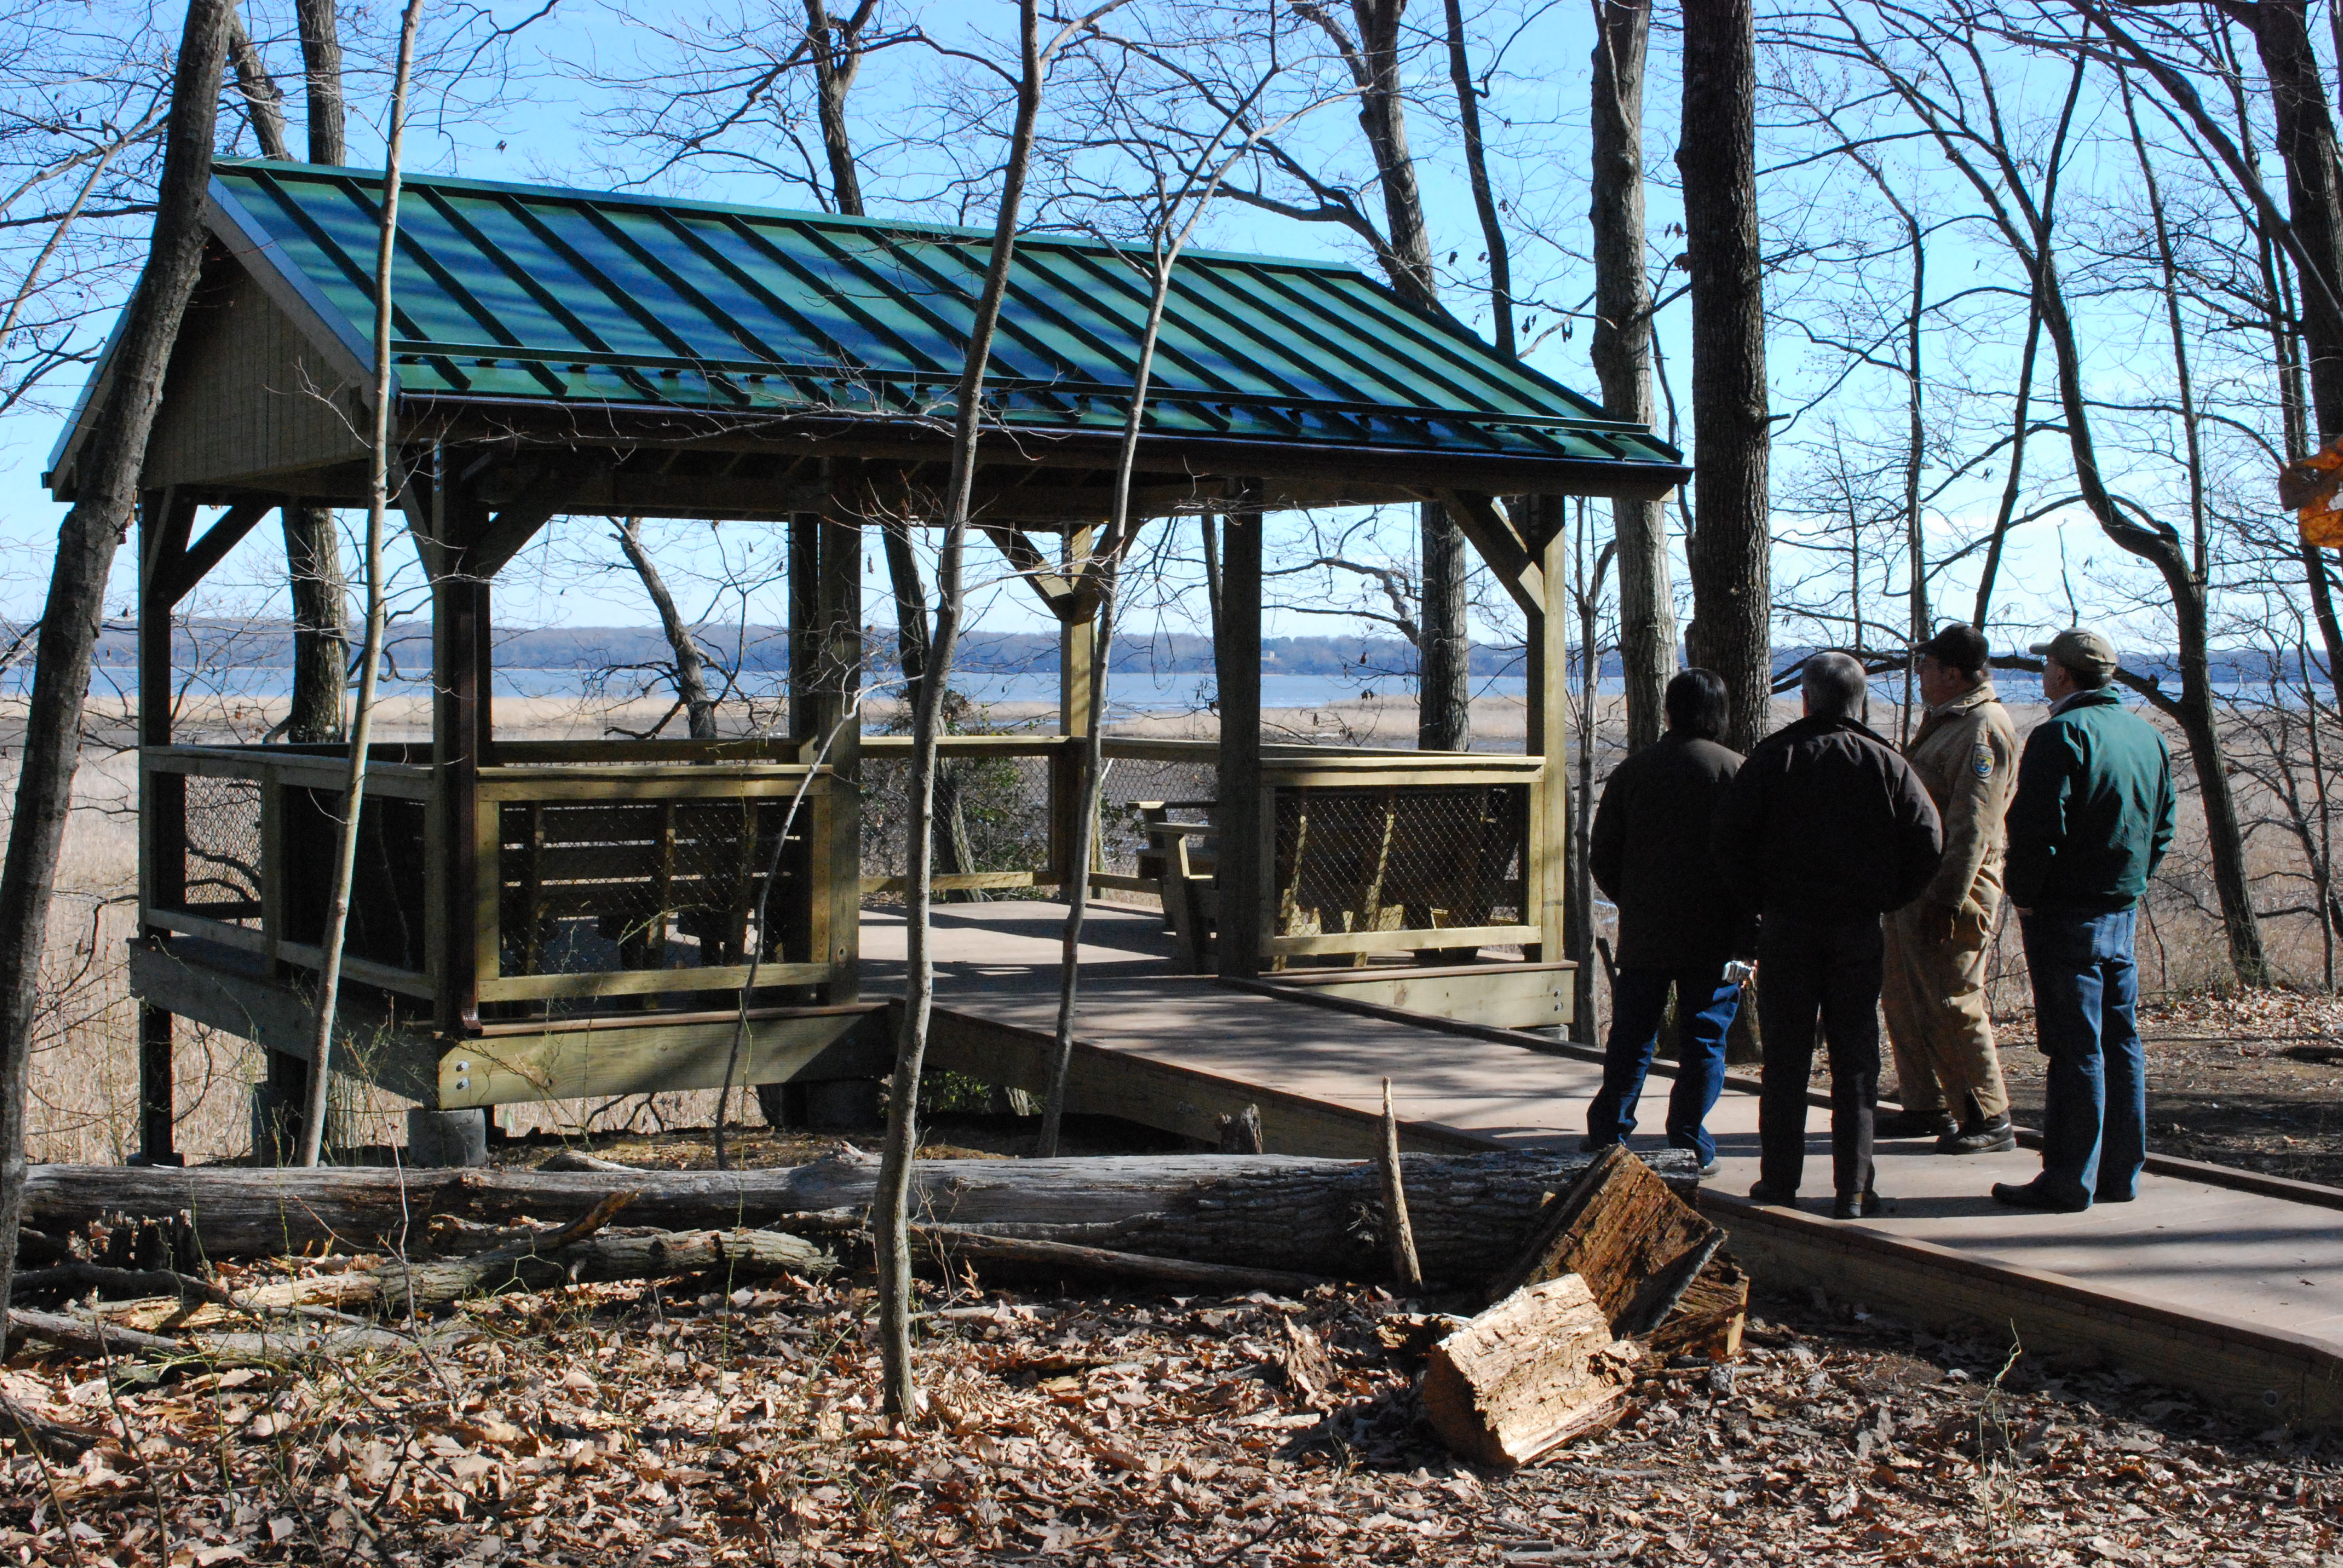 A group of four admires the newly built overlook at Mason Neck National Wildlife Refuge.